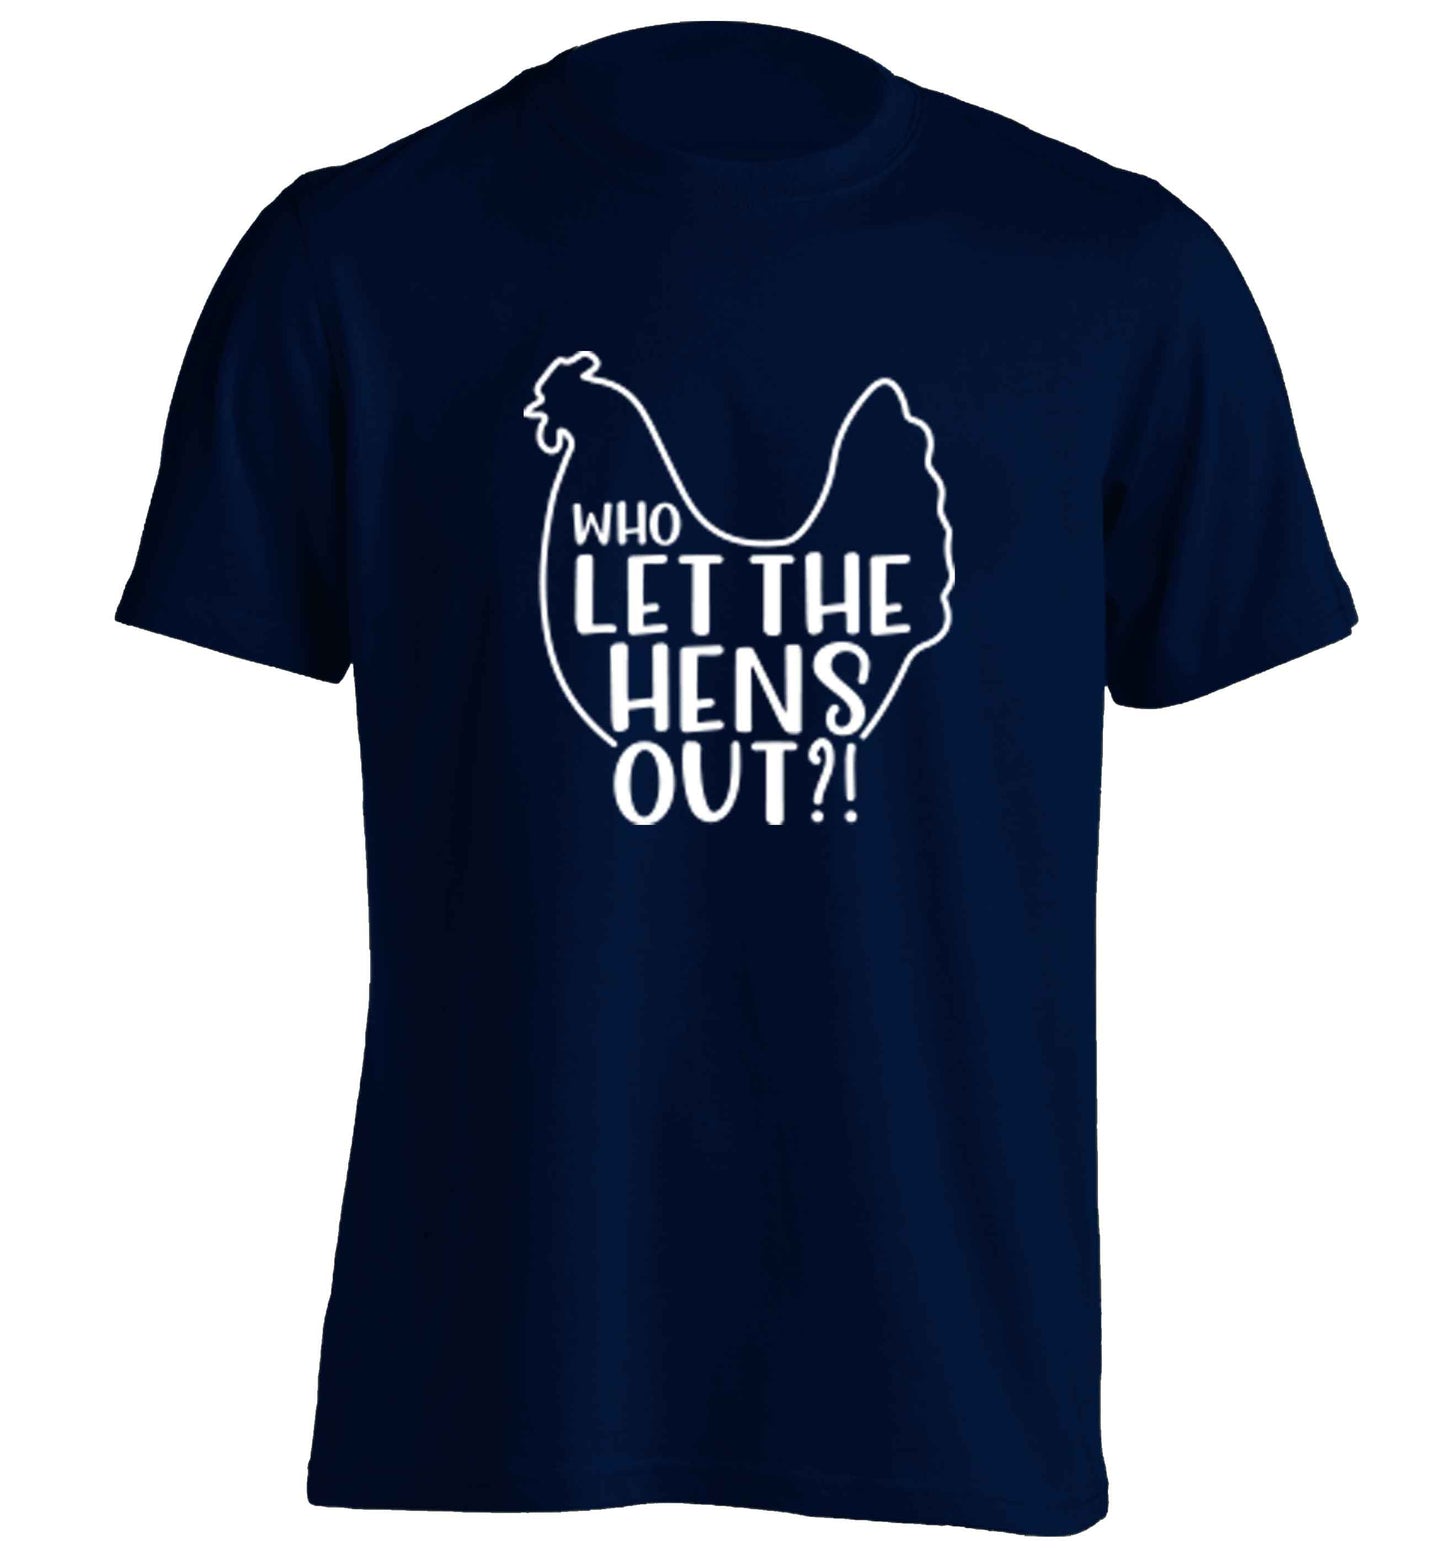 Who let the hens out adults unisex navy Tshirt 2XL